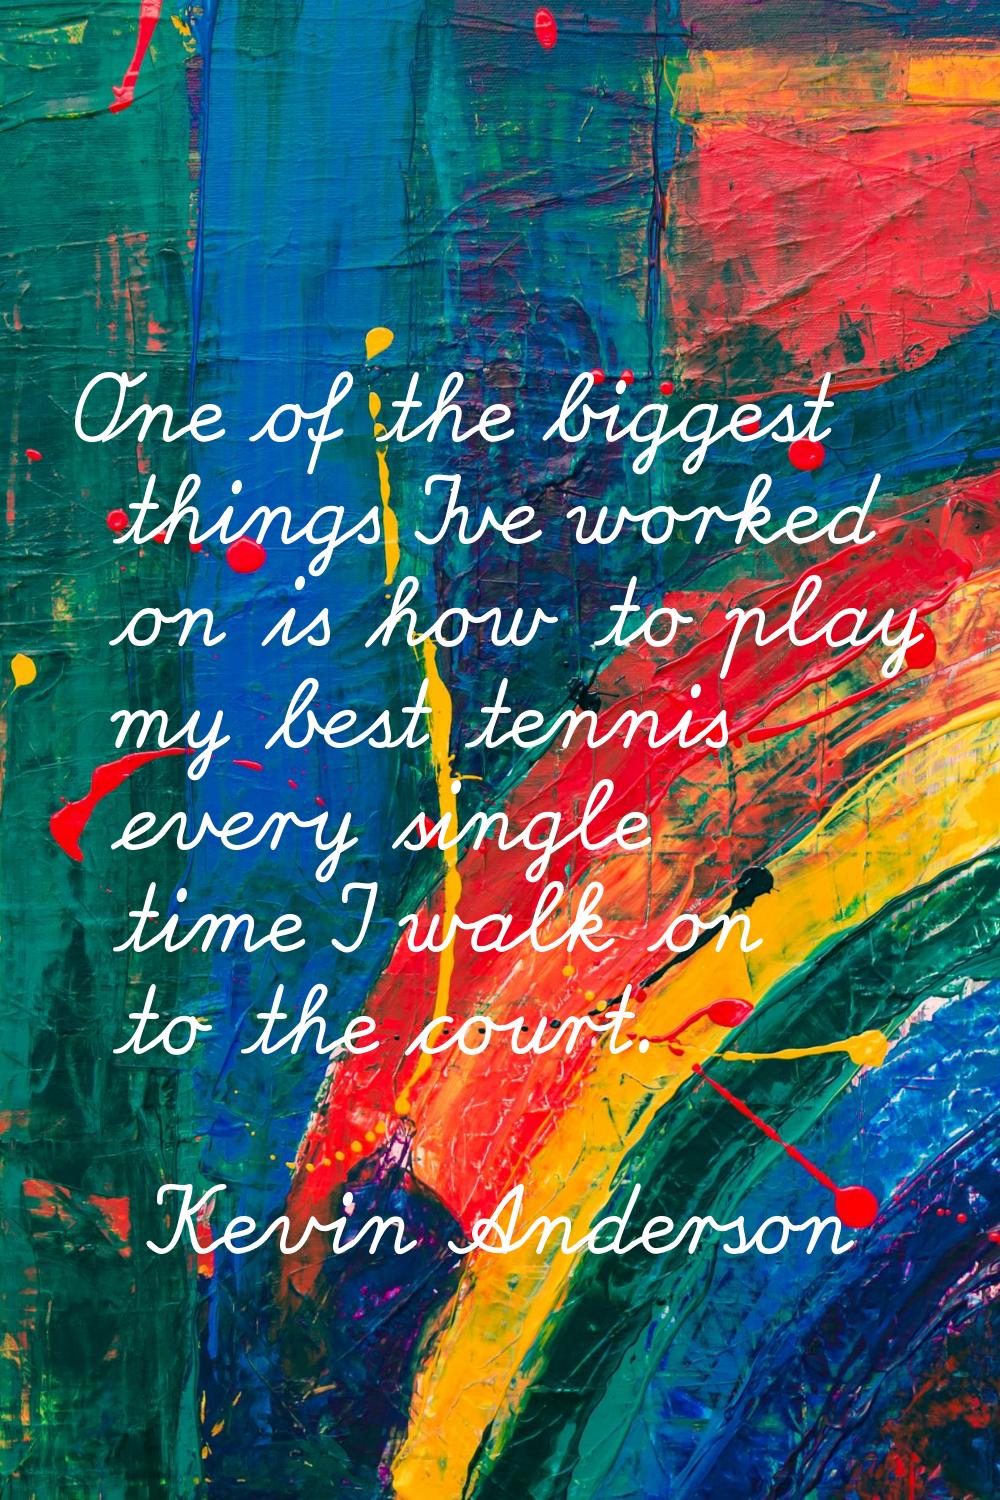 One of the biggest things I've worked on is how to play my best tennis every single time I walk on 